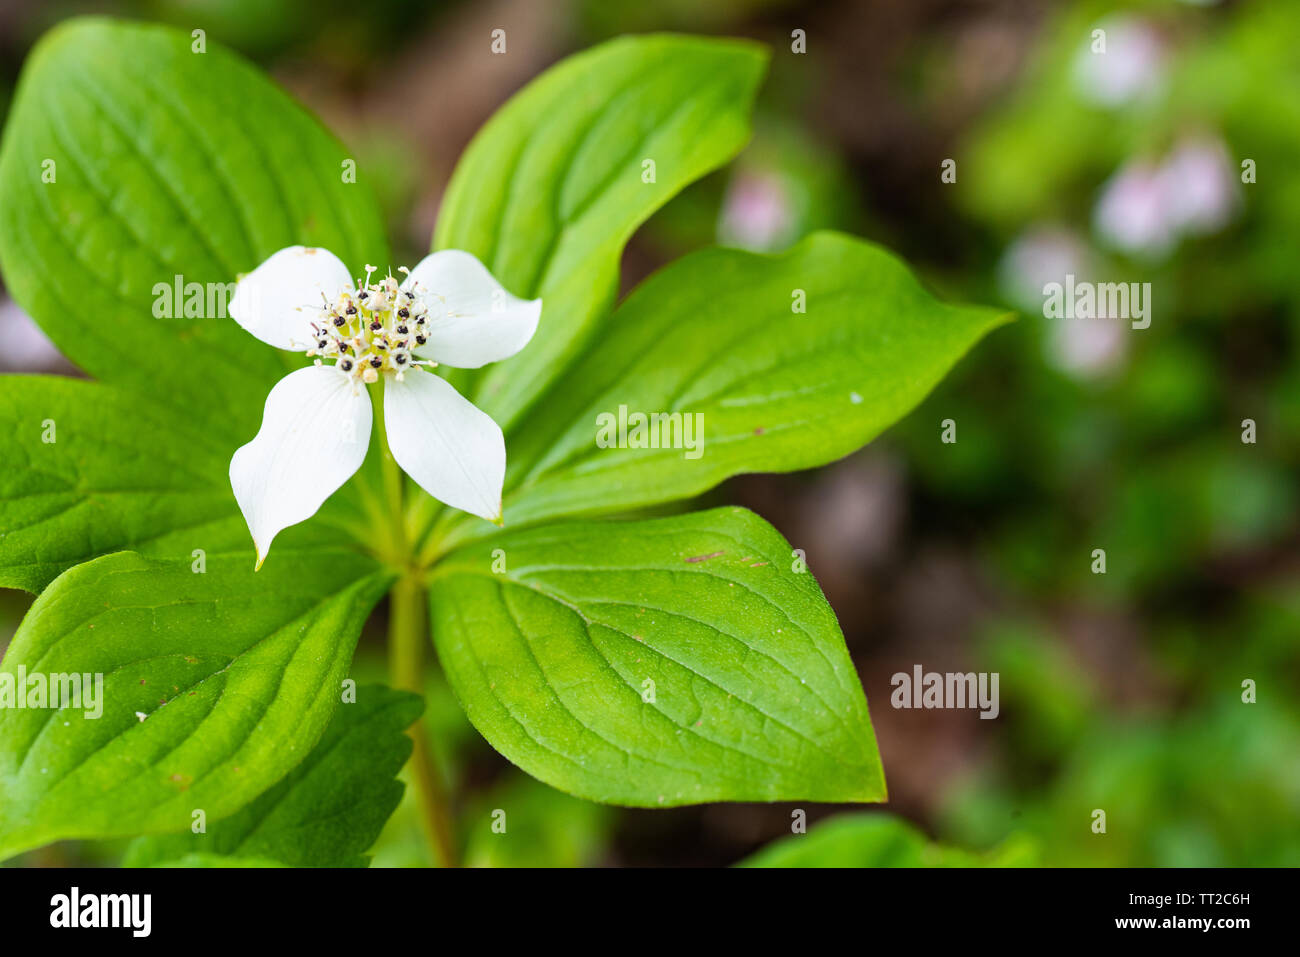 Dwarf dogwood, also called bunchberry, flower. Stock Photo